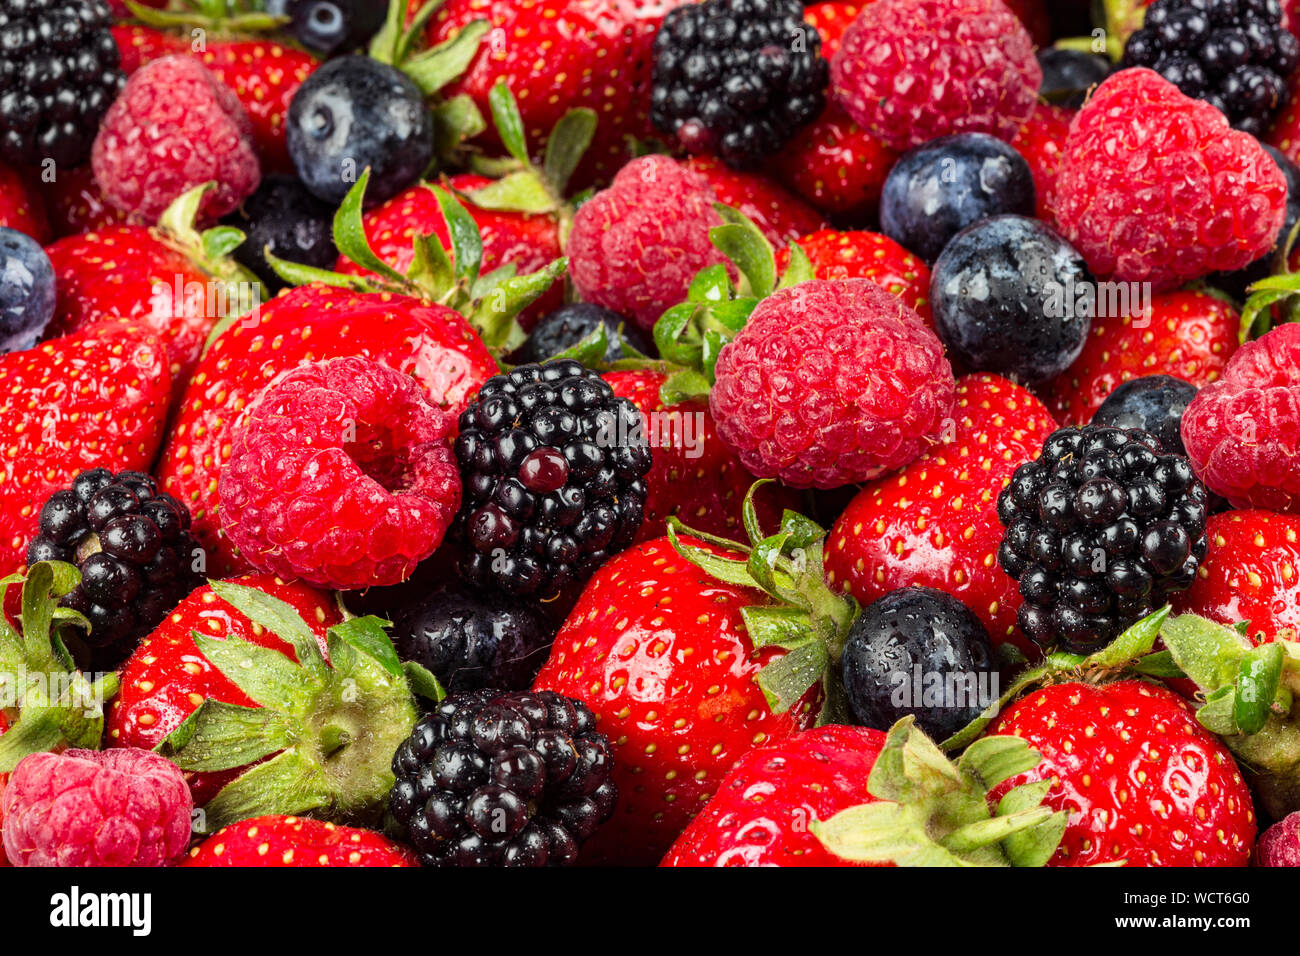 colorful tasty mix of wild forest berry fruits. Strawberry blueberry raspberry and blackberry. healthy eating nutrition vegan food concept background Stock Photo